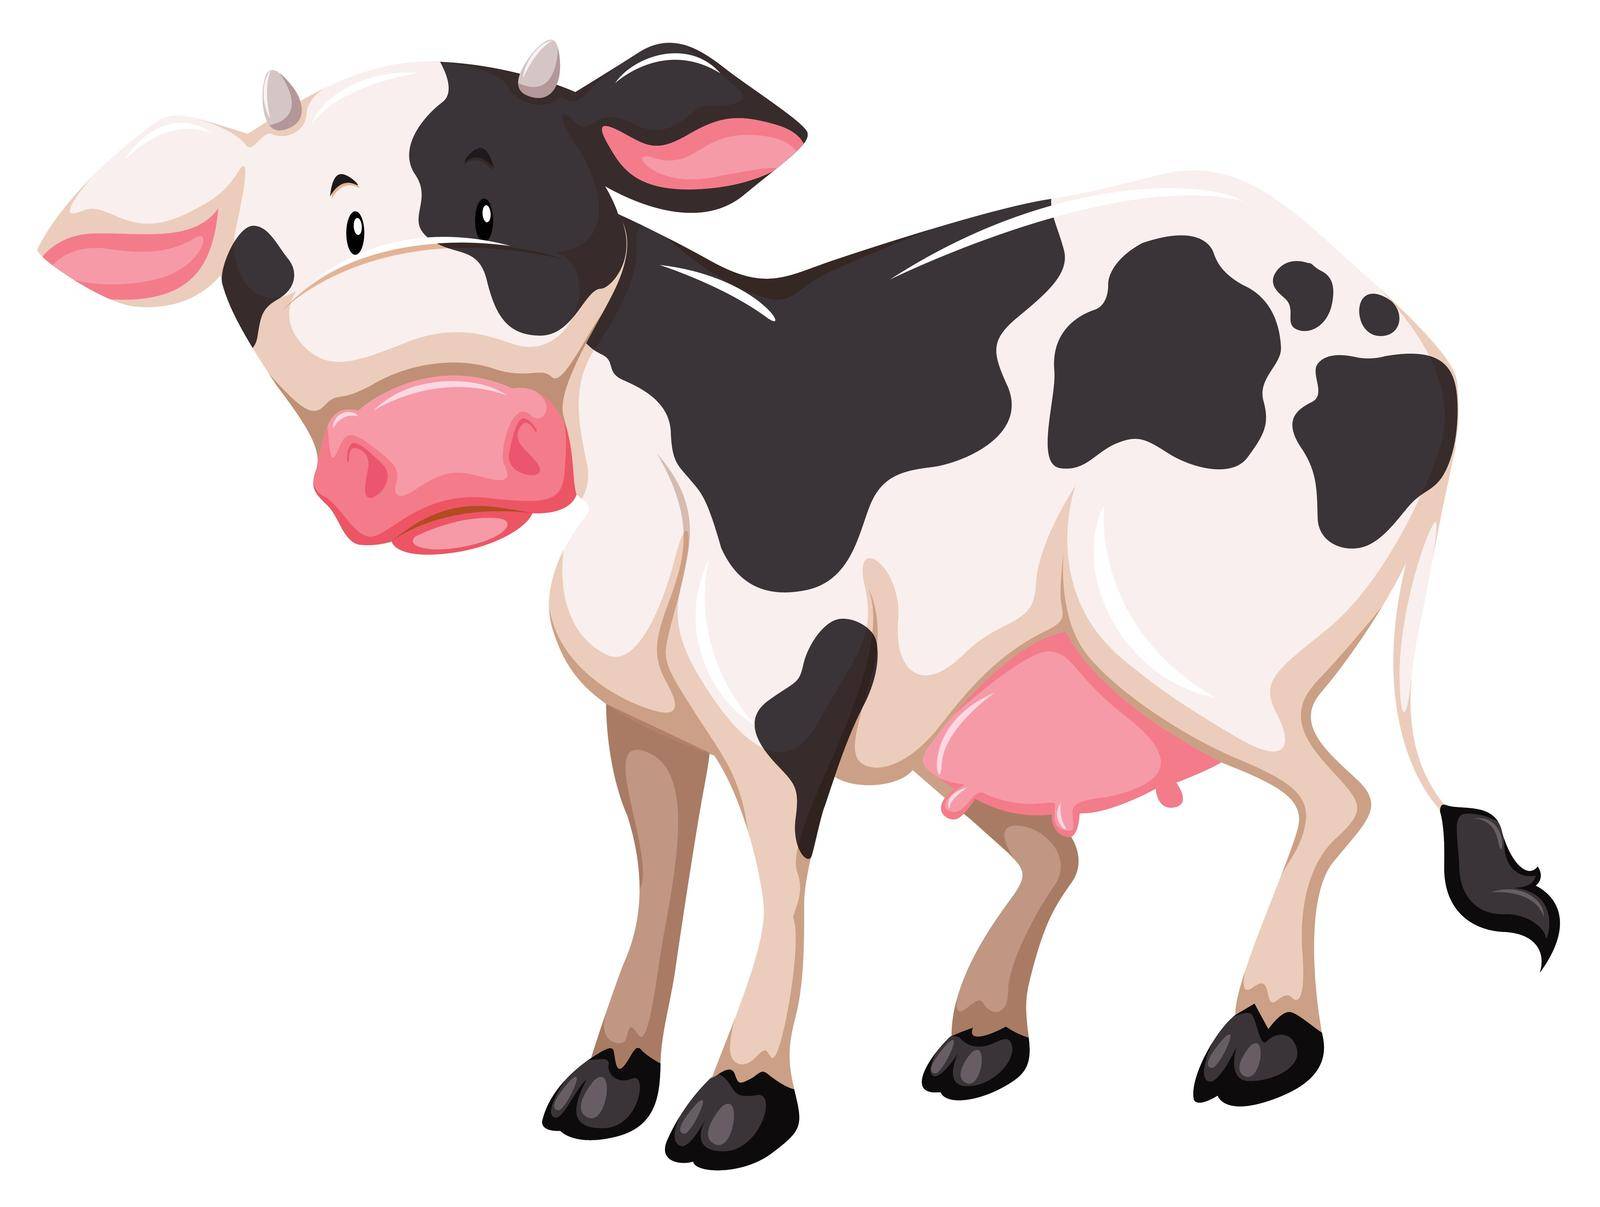 One milking animal on a white background